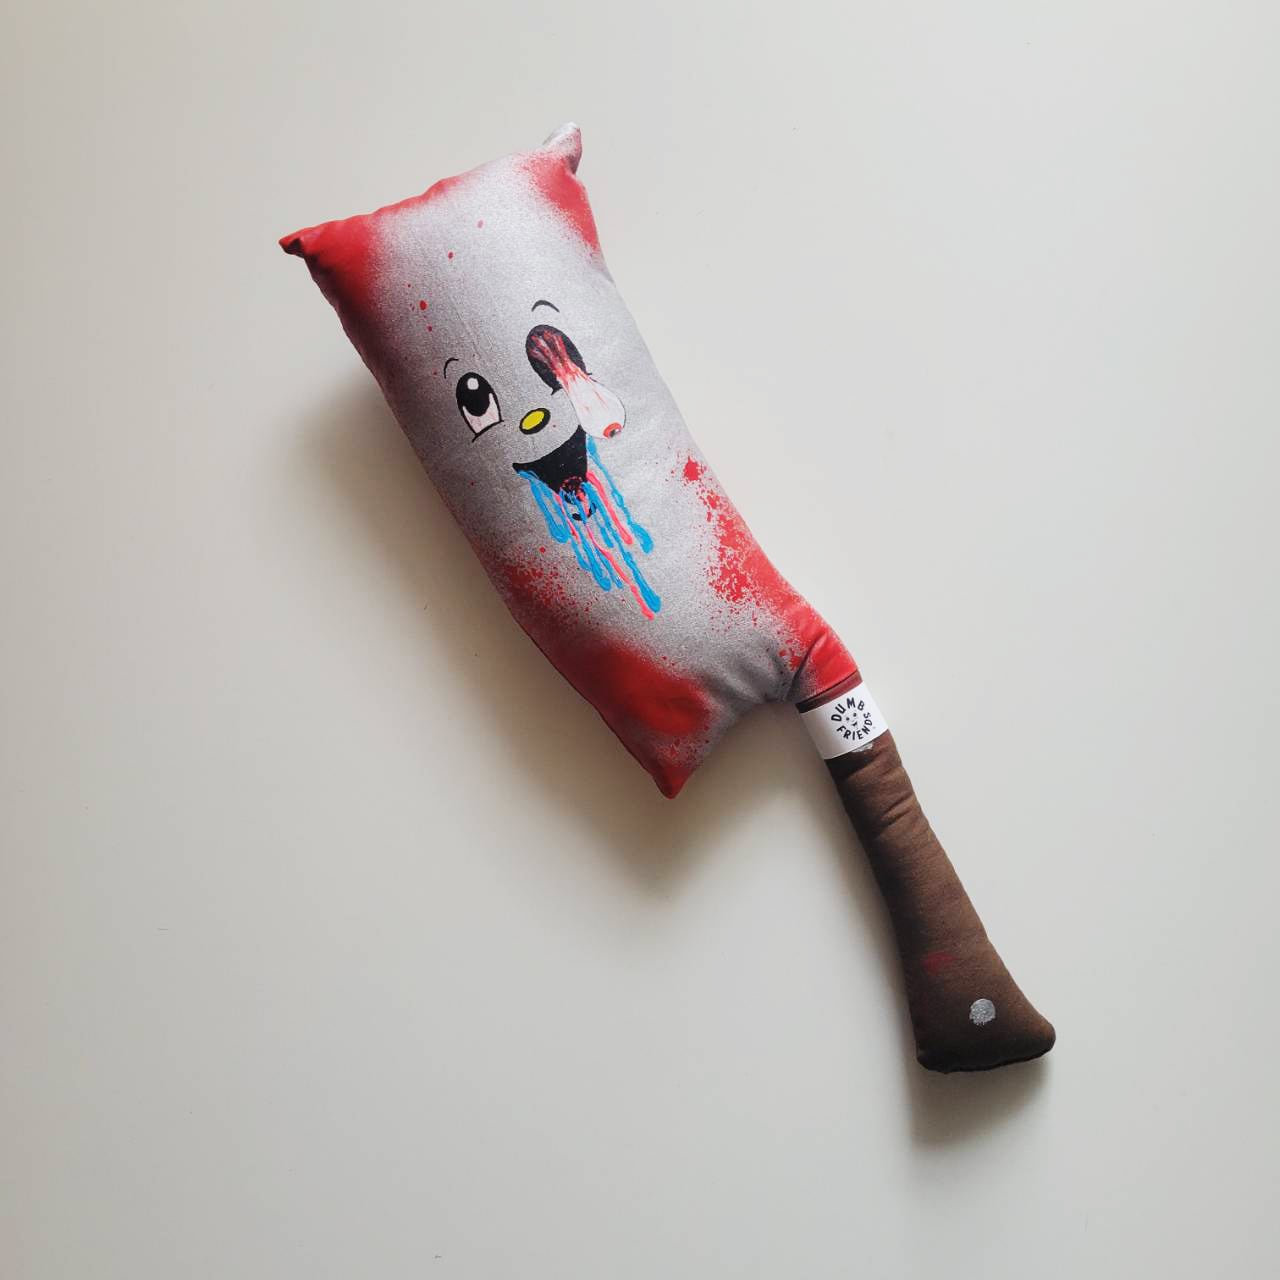 ||||| Dumb Friends "Eye Popped Out Chinese KNIFE MAN" PLUSH TOY